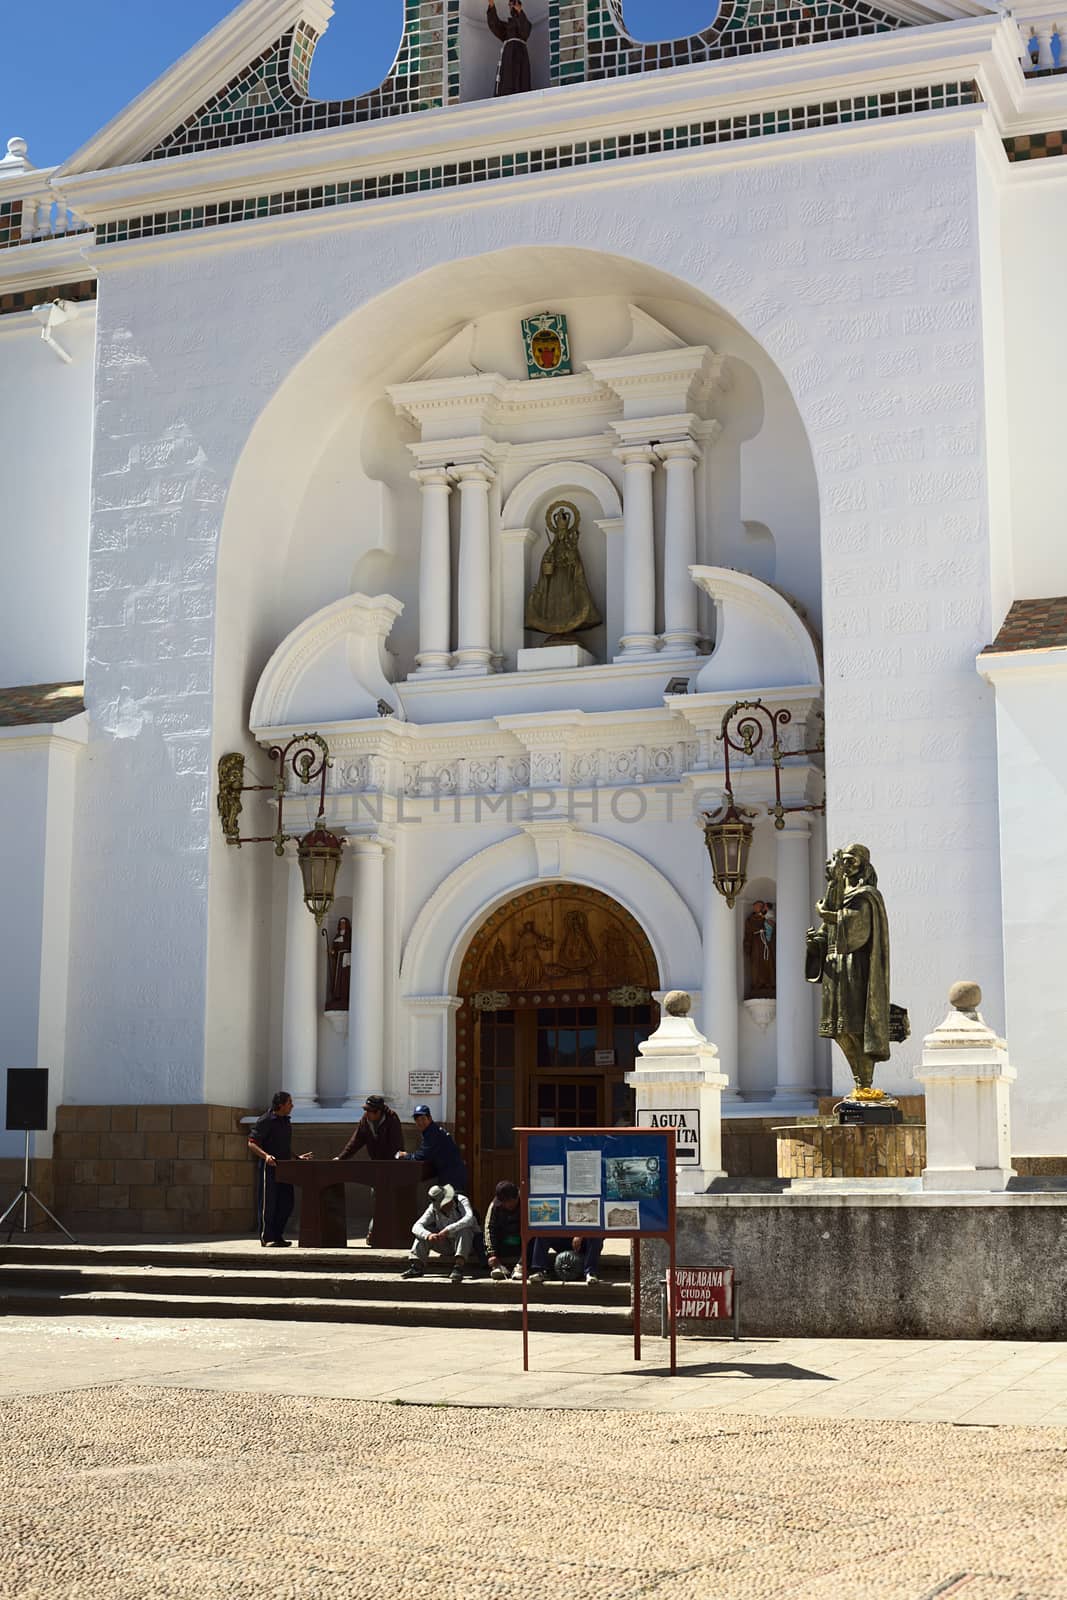 COPACABANA, BOLIVIA - OCTOBER 18, 2014: Unidentified people sitting and standing outside the entrance of the Basilica of Our Lady of Copacabana in the small tourist town along the Titicaca Lake on October 18, 2014 in Copacabana, Bolivia 